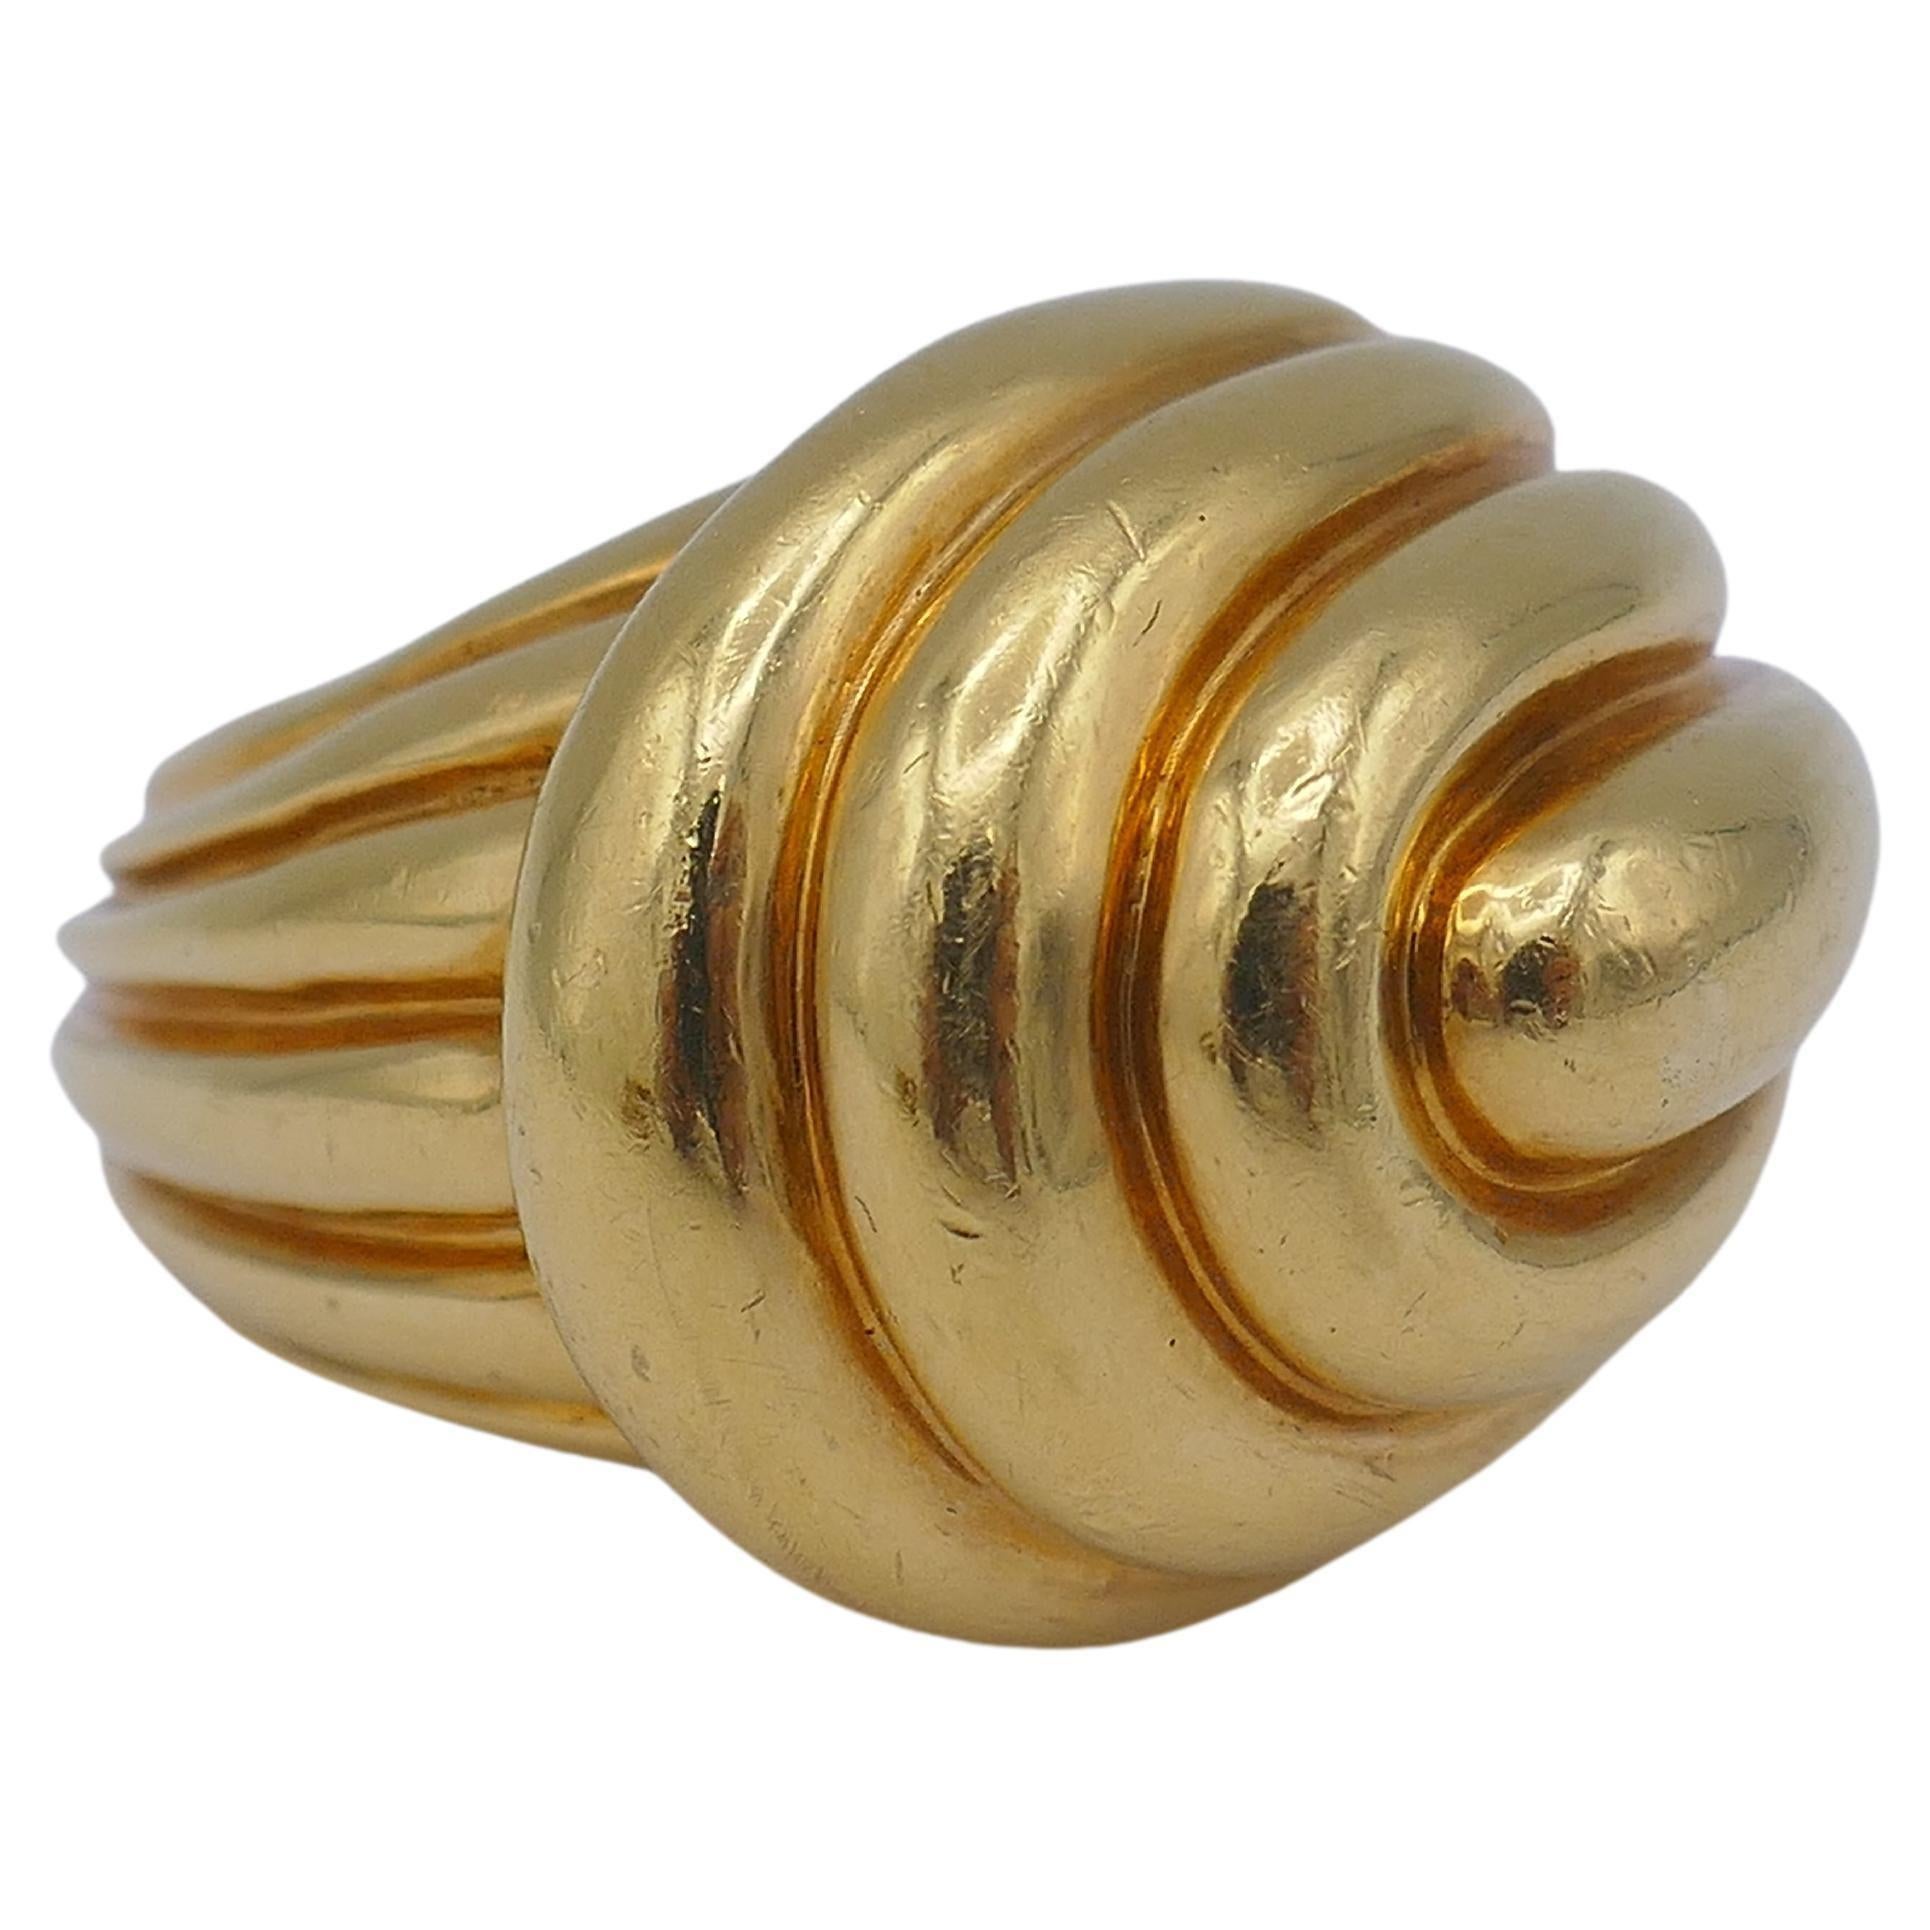 A classic David Webb 18k gold ring. 
The ring is designed as a ribbed gold swirl wrapped around a finger. The gold looks soft, and with an amazing vintage hue has depth and silky texture. 
The ring is chunky yet fluid, and its shape is equally